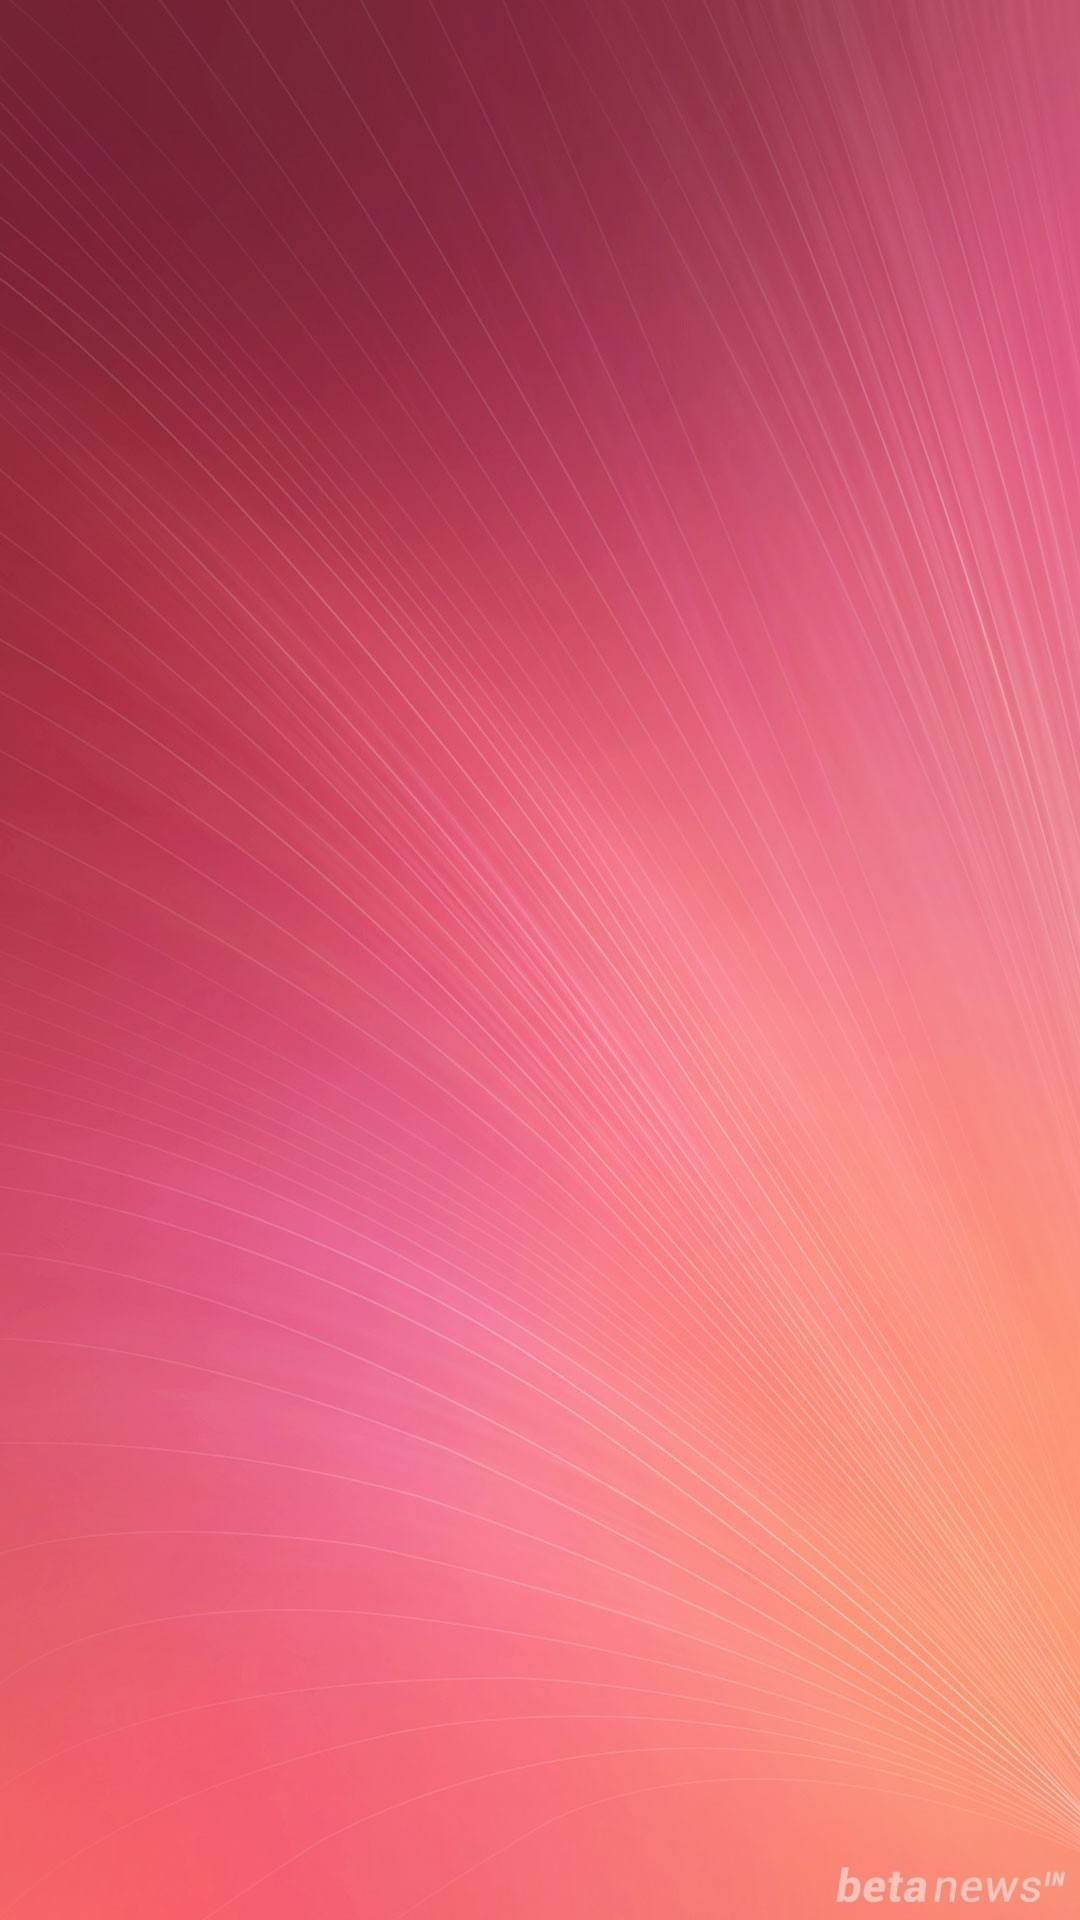 White Lines Across Pink Backdrop Miui Wallpaper